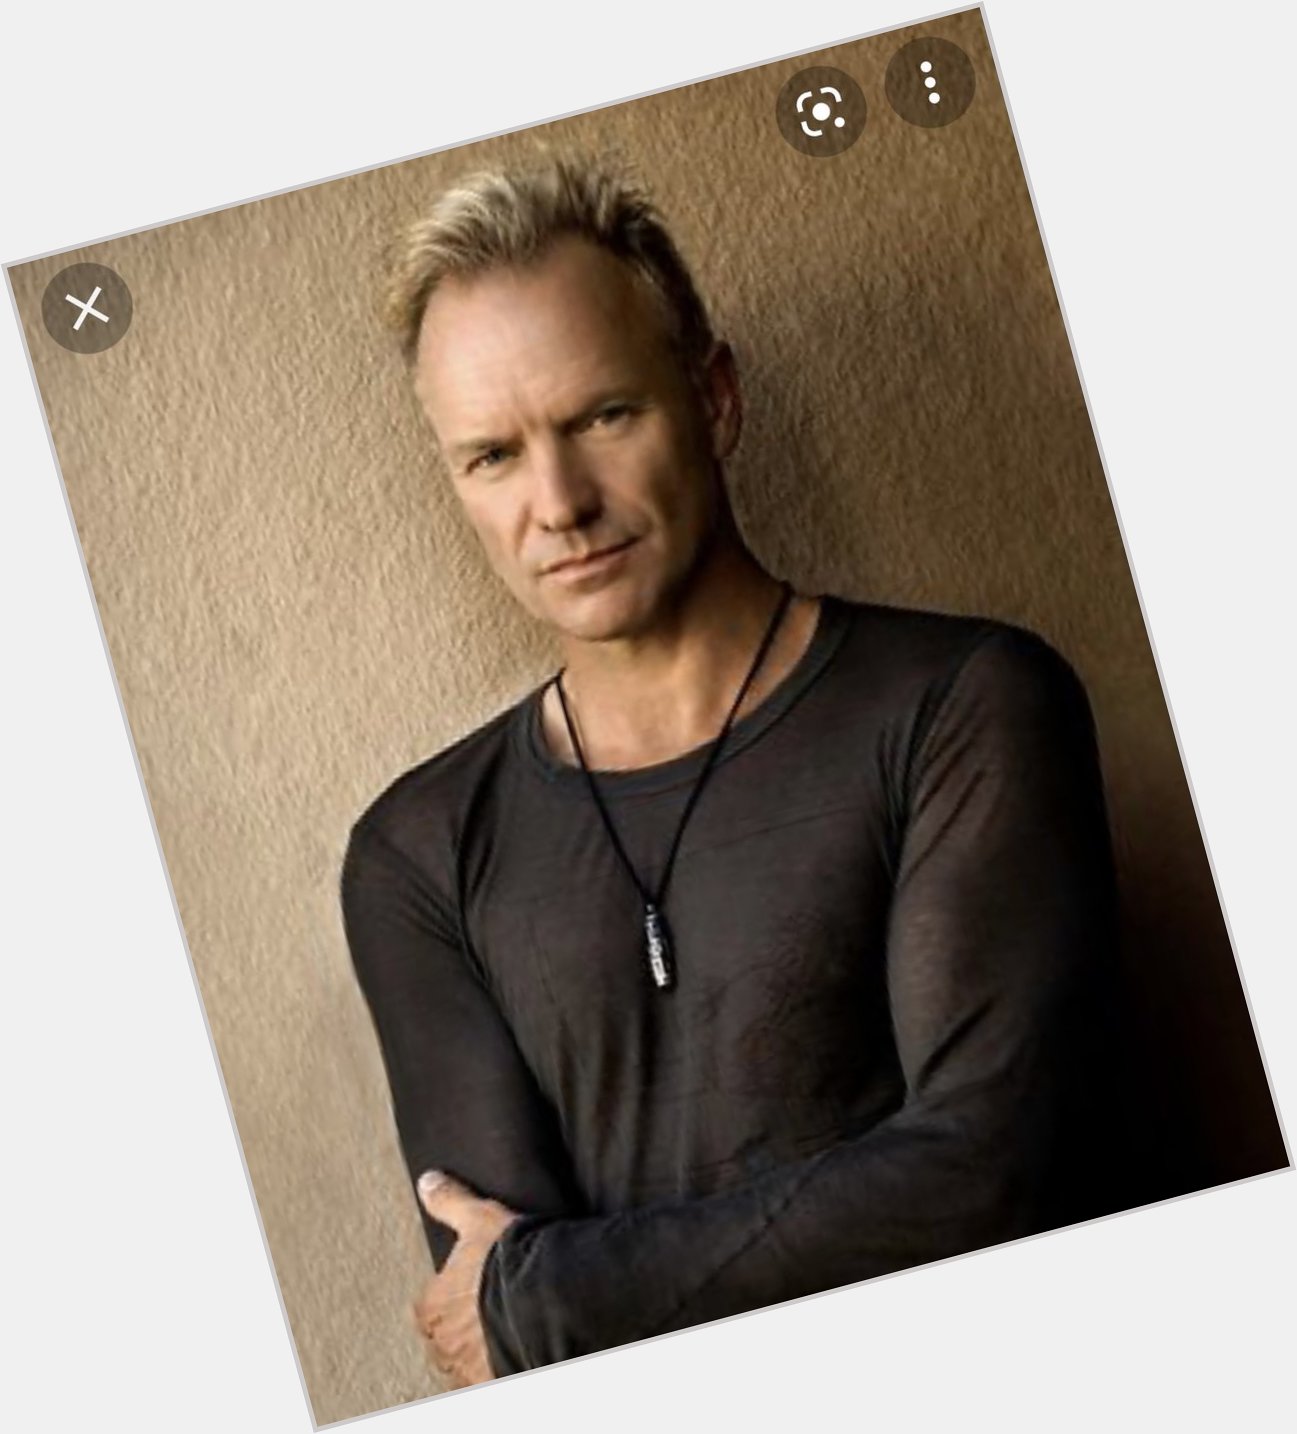  Happy 70th Birthday Sting ! One of the greats 